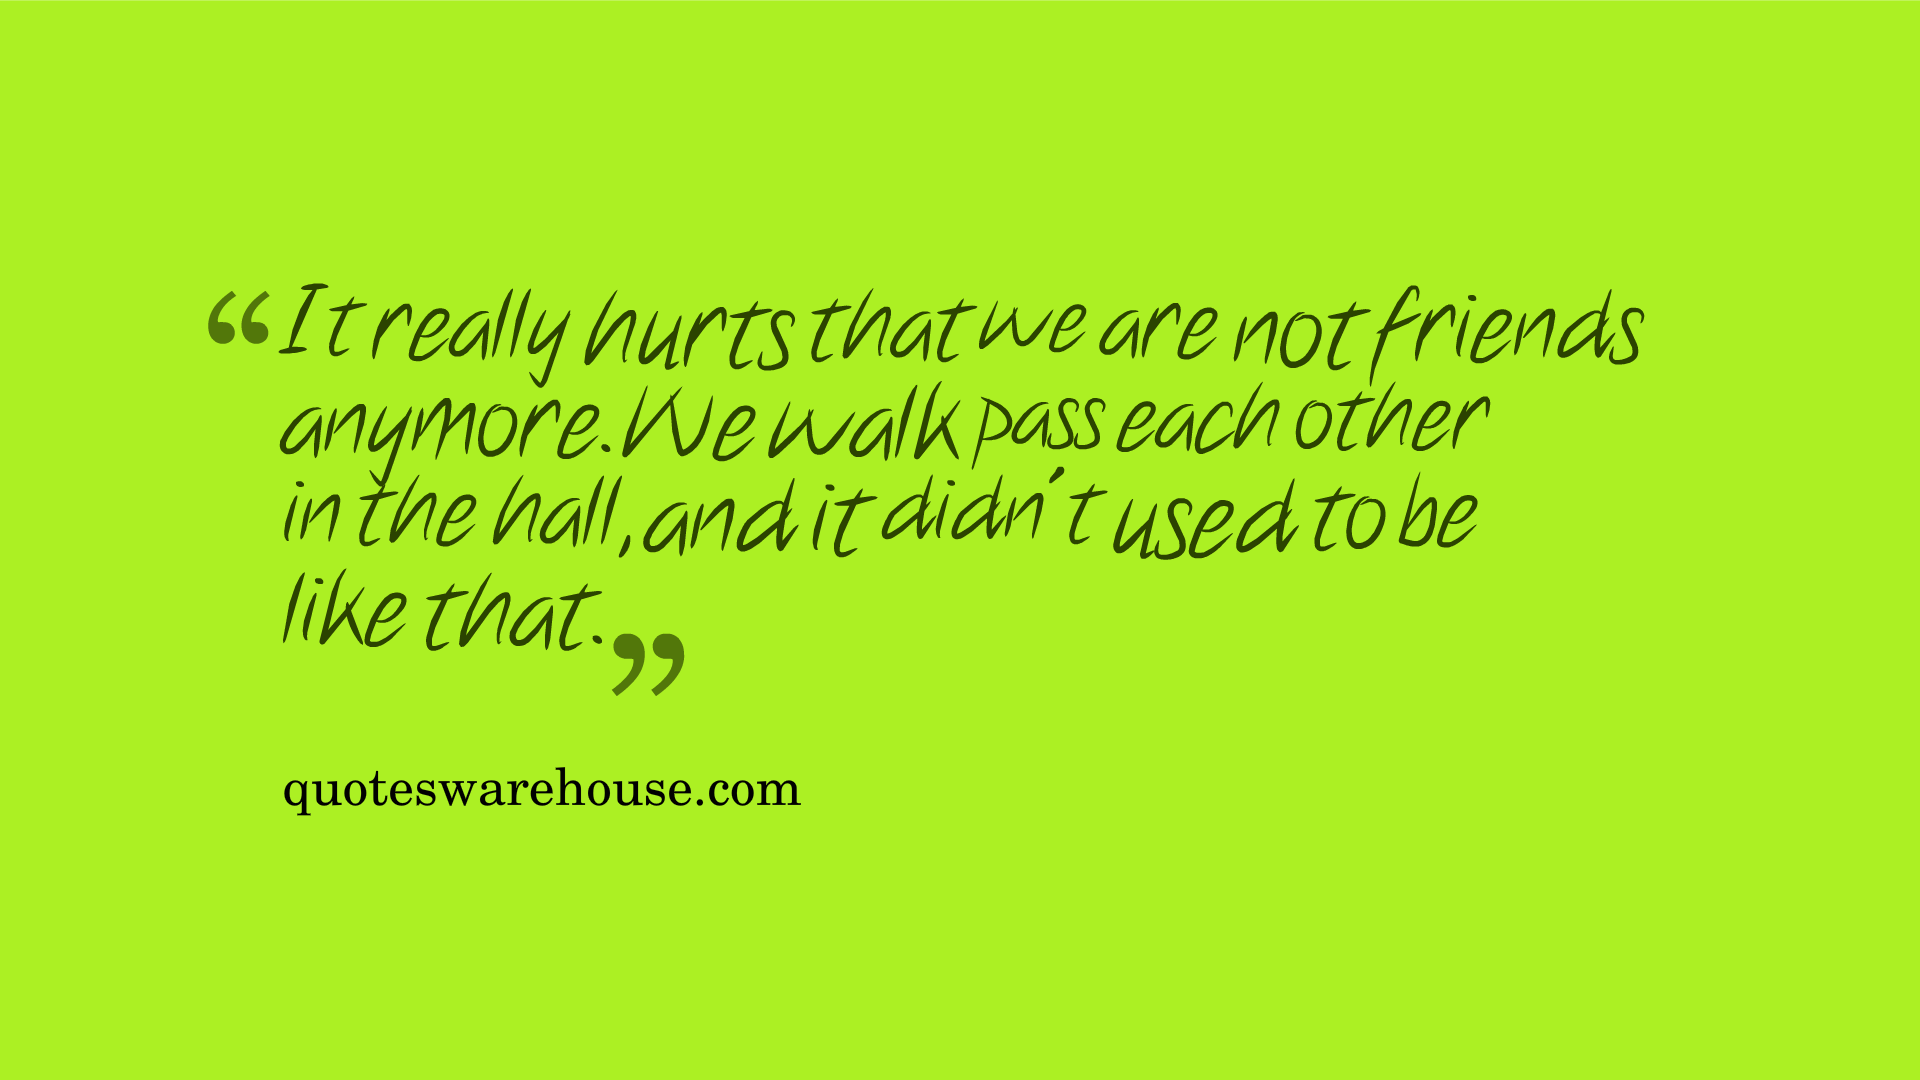 Broken Friendship Quotes And Sayings. QuotesGram